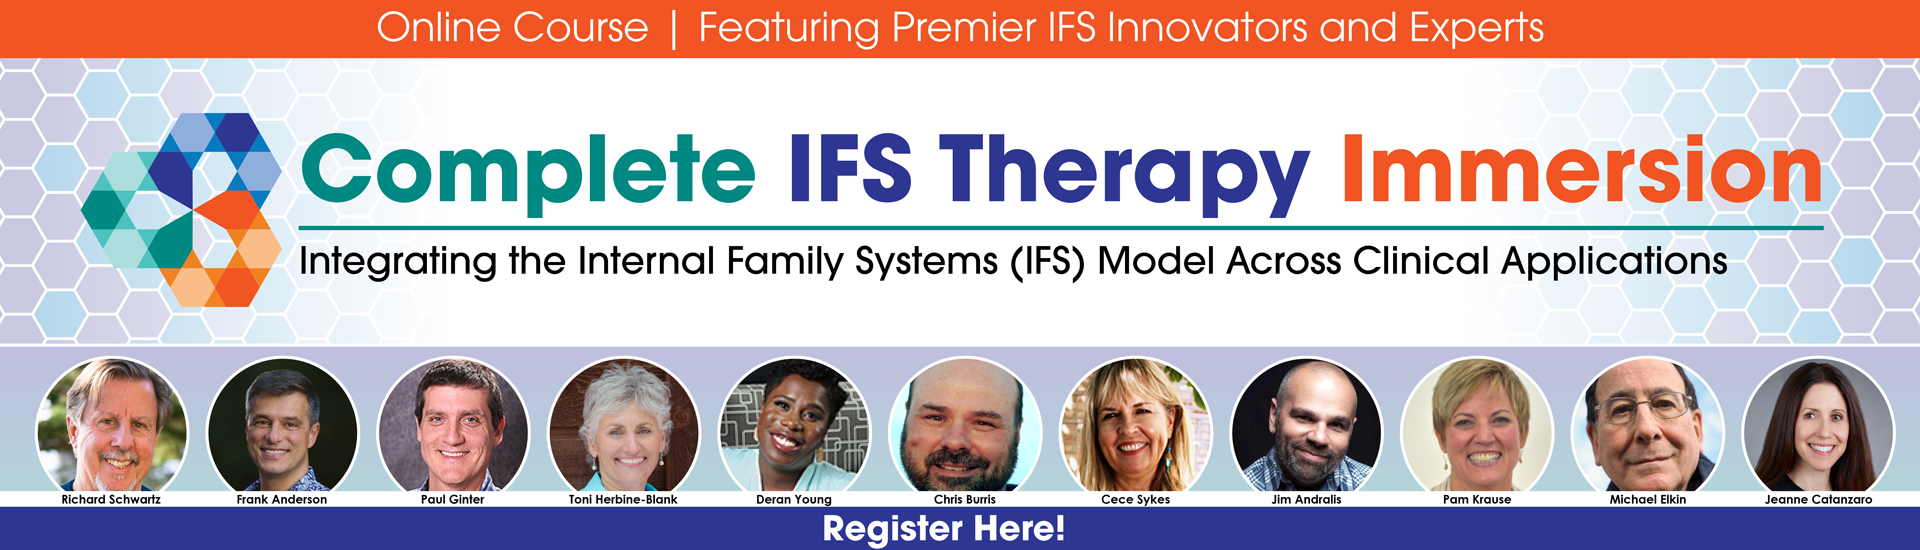 Complete IFS Therapy Immersion